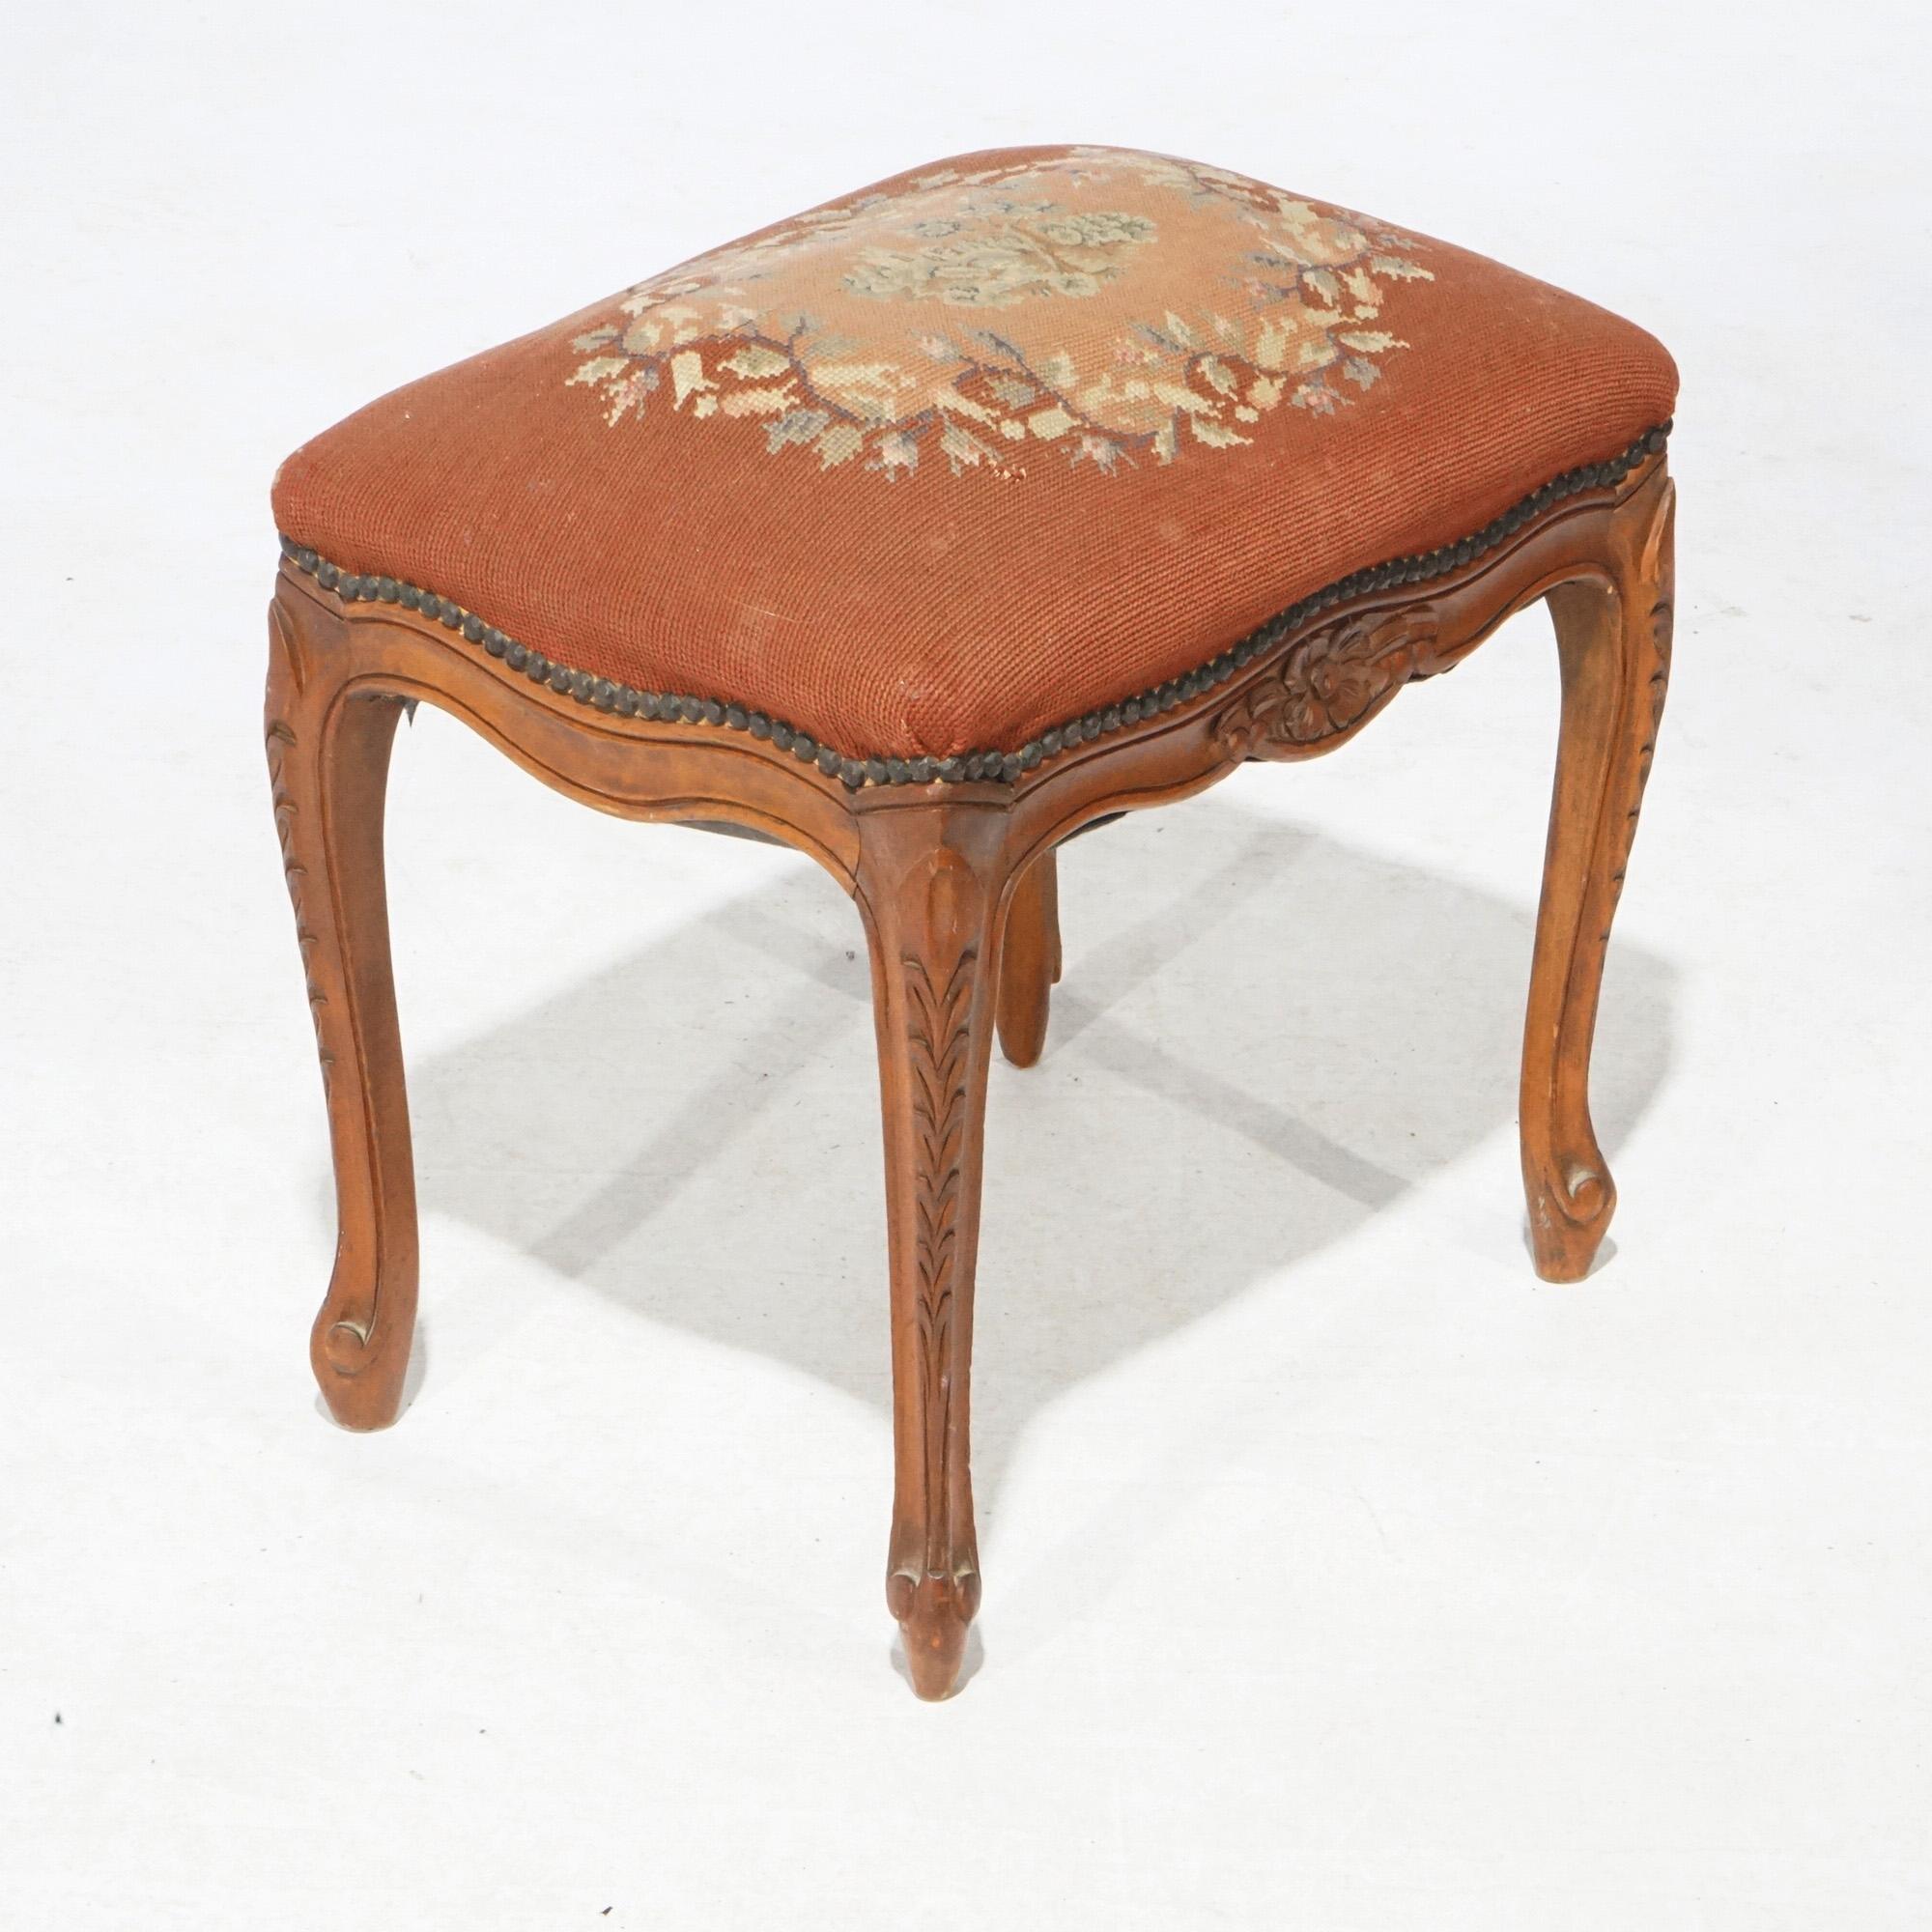 An antique French vanity bench offers needlepoint upholstered seat with floral reserve over walnut base with carved floral elements and raised on cabriole legs, circa 1920

Measures- 18.5''H x 18.5''W x 13.75''D.